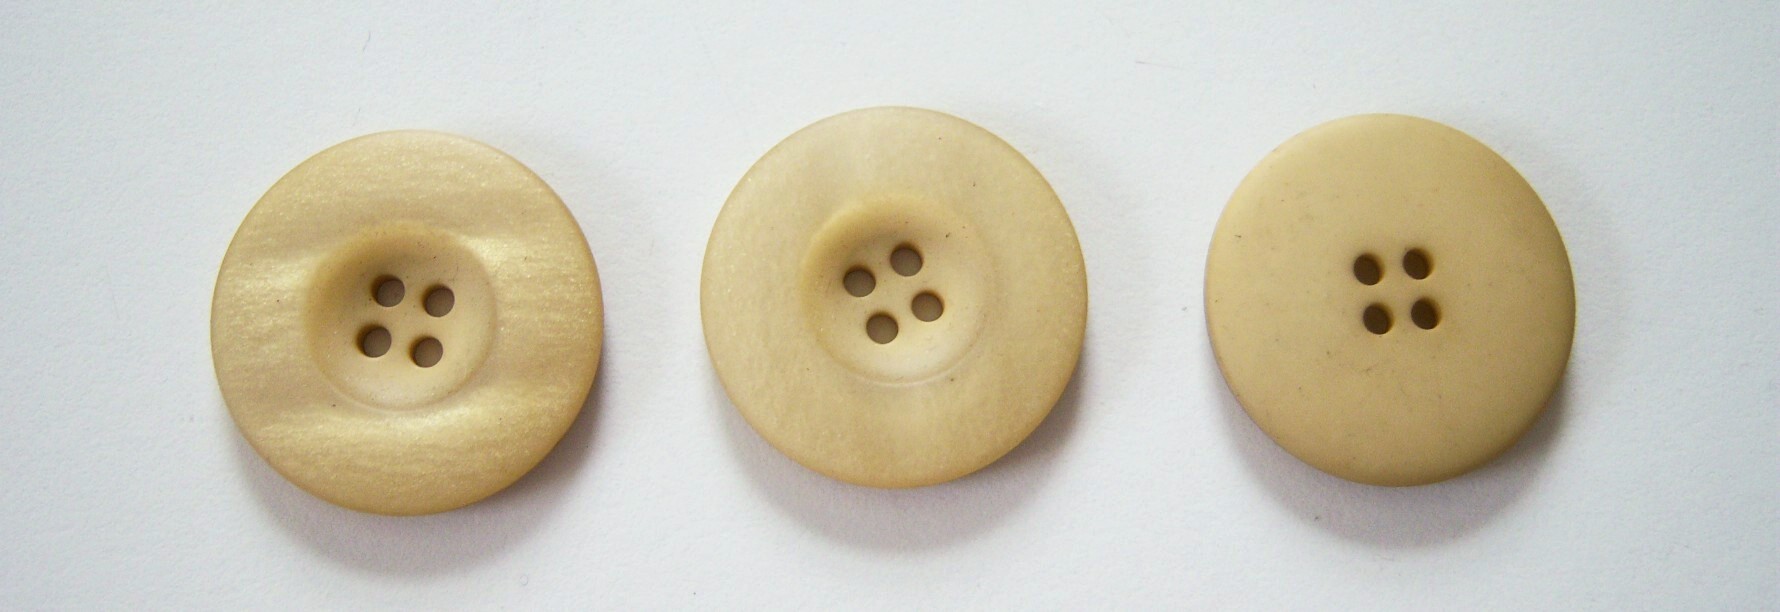 Golden Beige 1 1/8" Pearlized Poly Button